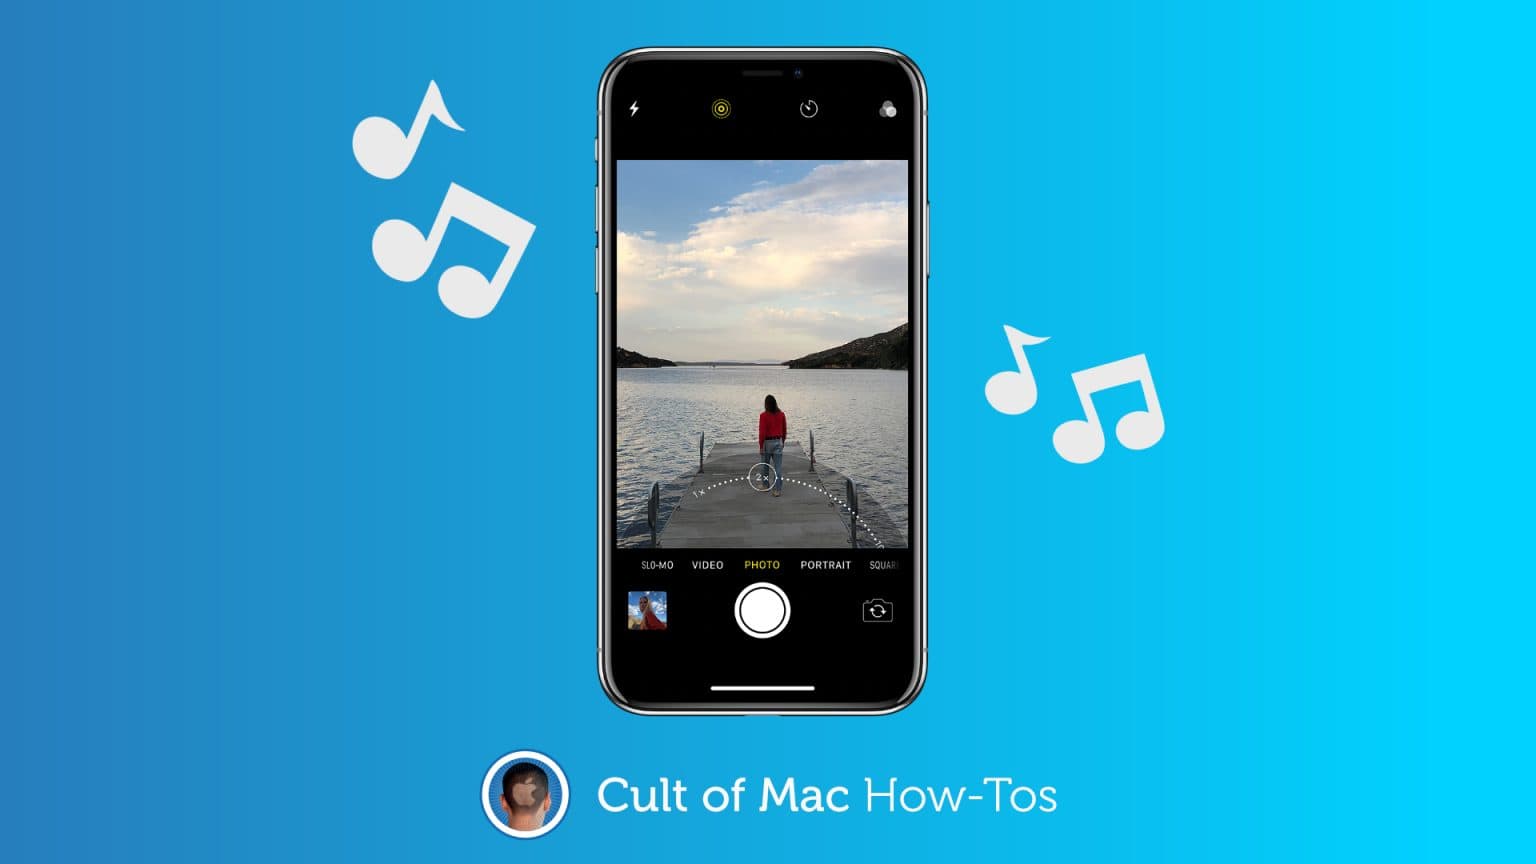 Record video while playing music on iPhone